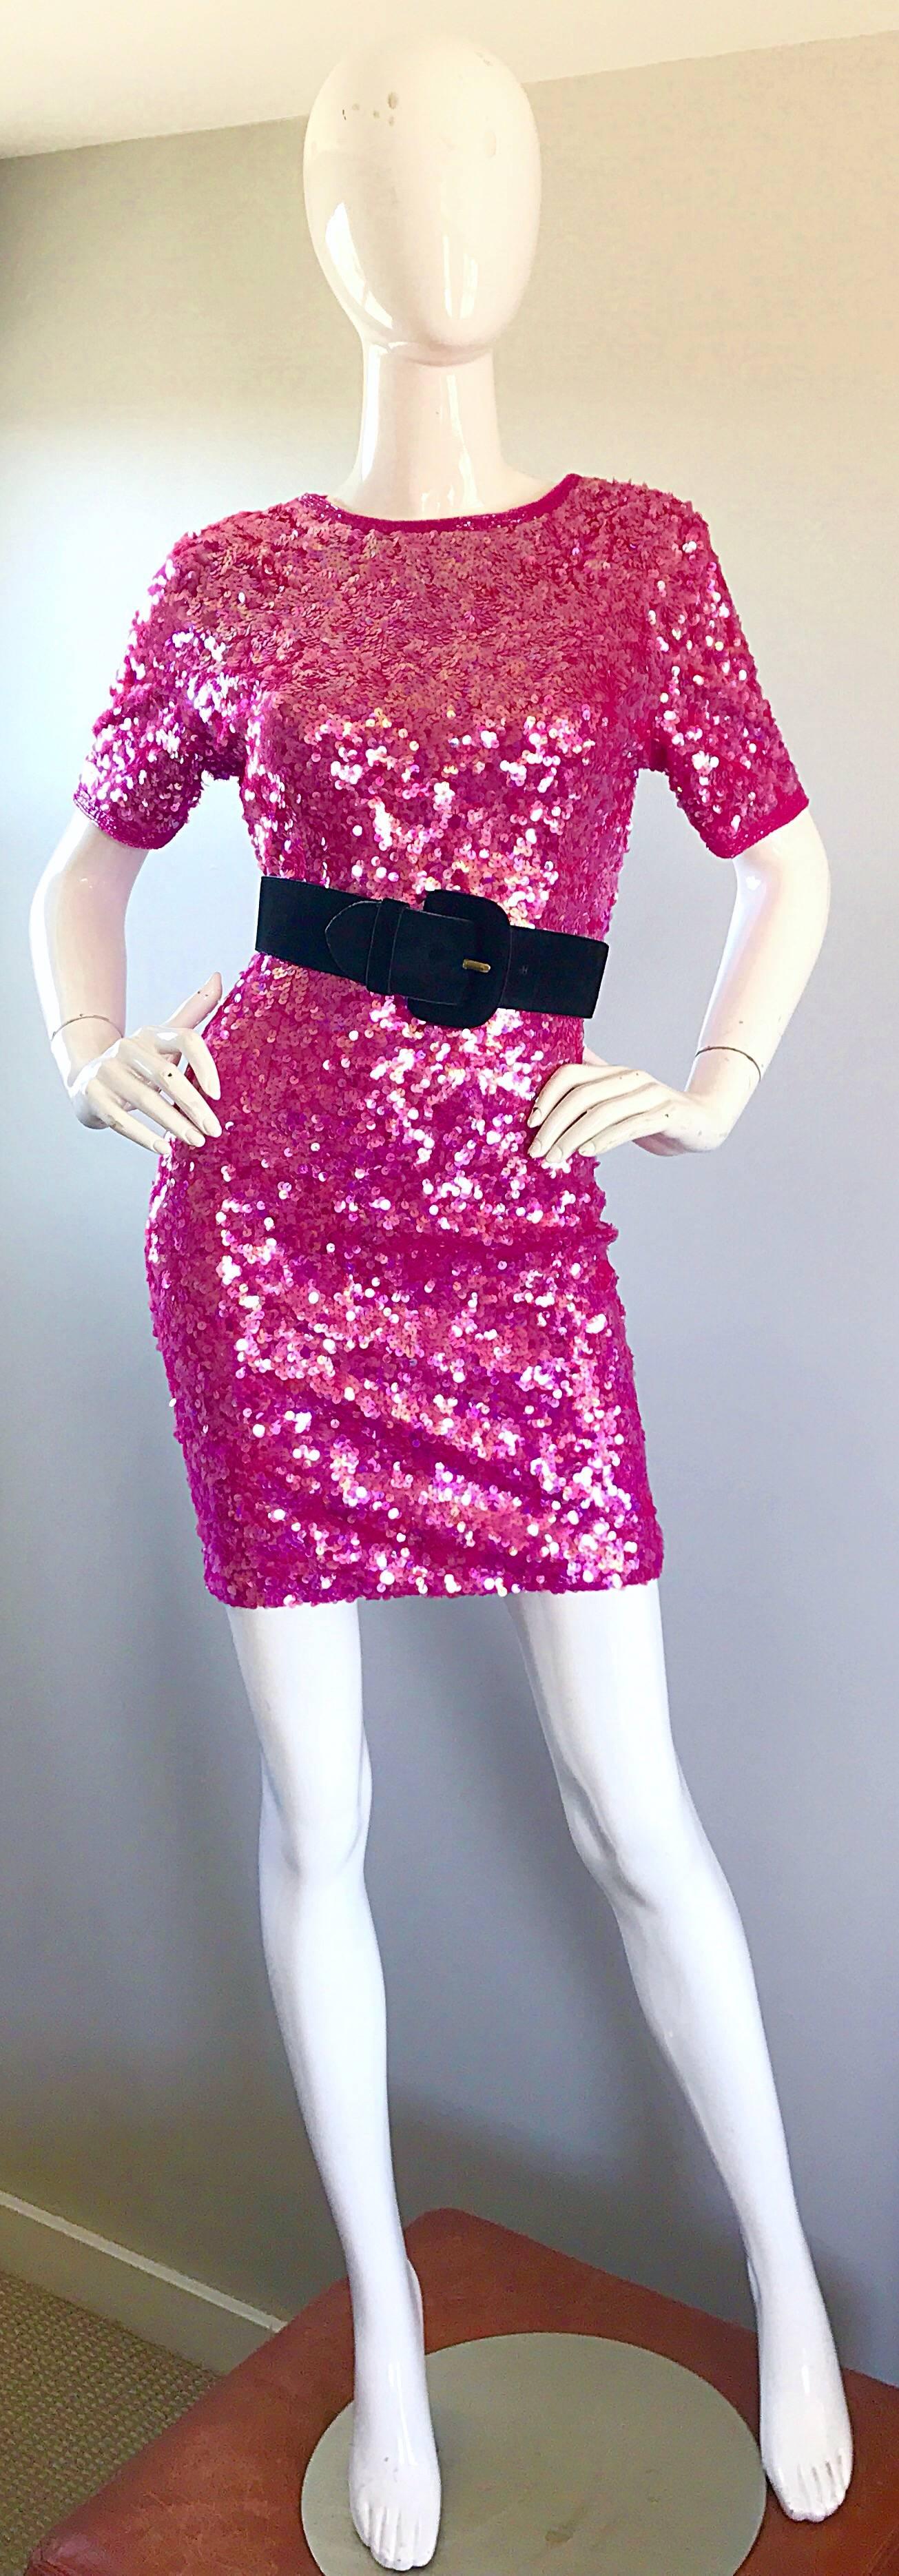 Incredible Vintage Lillie Rubin 1990s Hot Pink Fully Sequined 90s Mini Dress In Excellent Condition For Sale In San Diego, CA